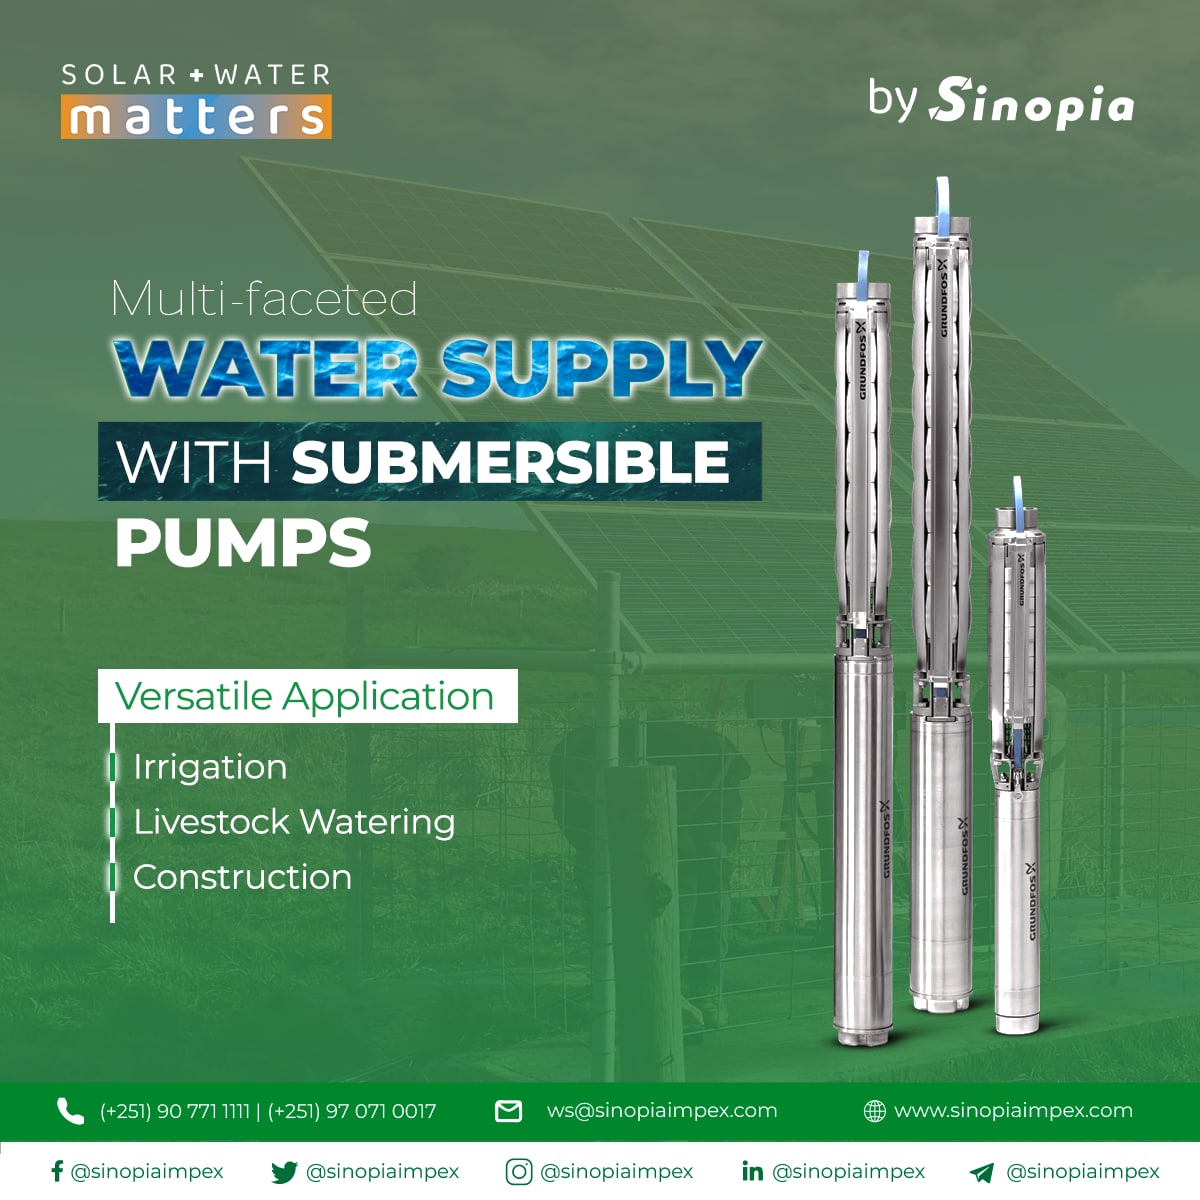 WATER SUPPLY WITH SUBMERSIBLE PUMPS

Submersible pumps combine the very best materials with optimized hydraulic design to grant a broad range of water advancement.

Solution Matters!
#Pump #SolarPump #WaterProjects #WashProjects #SolarPumpingSystem #WaterSolutions #WaterPump